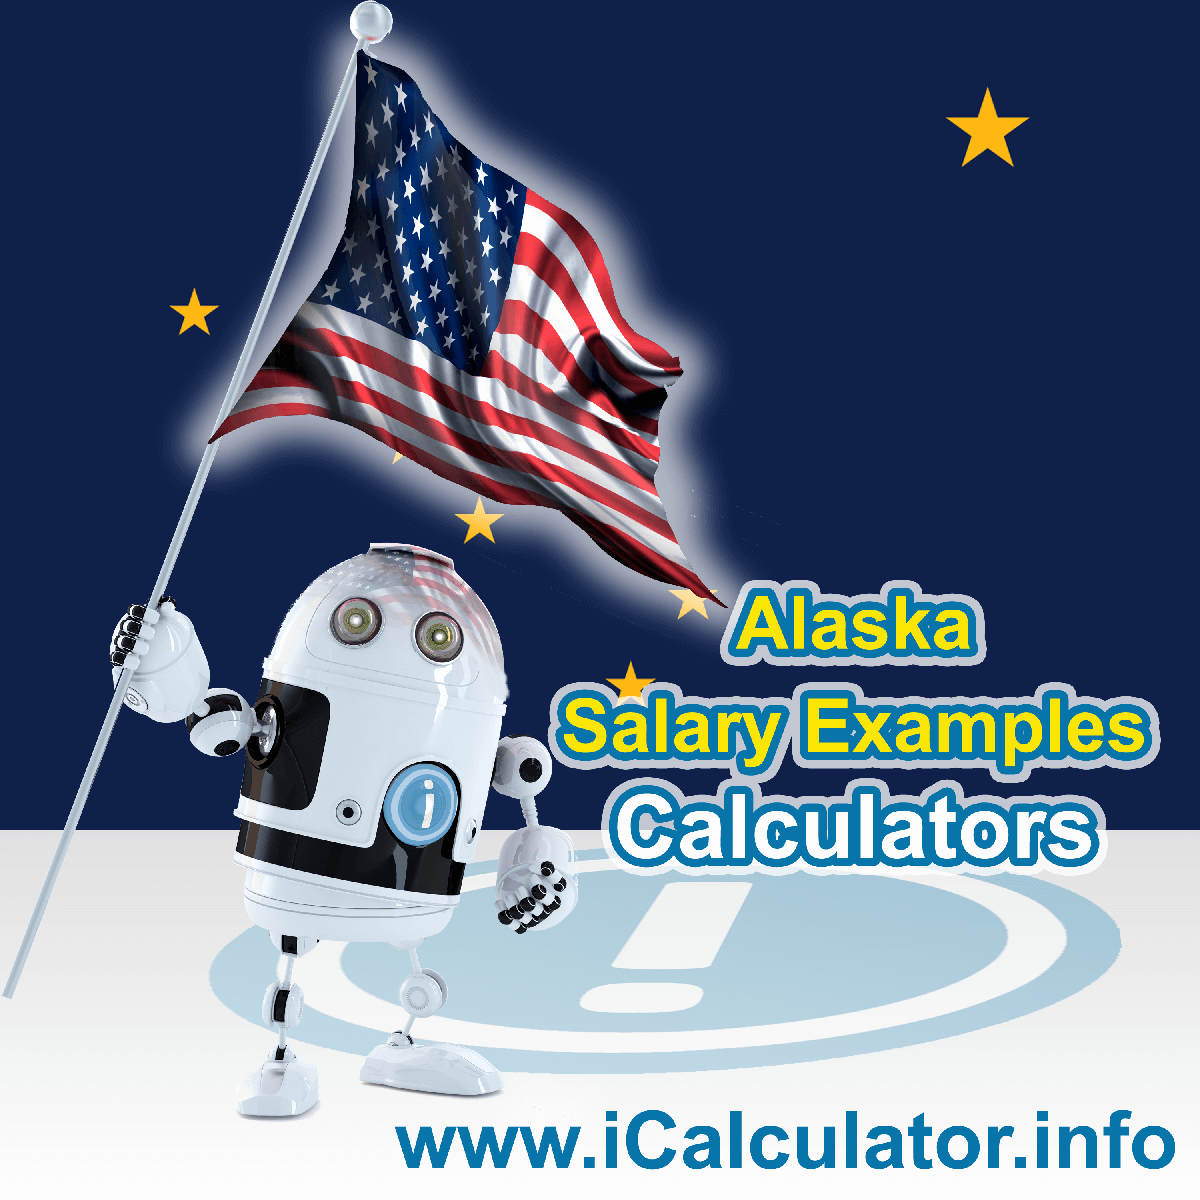 Alaska Salary Example for $ 85,000.00 in 2023 | iCalculator™ | $ 85,000.00 salary example for employee and employer paying Alaska State tincome taxes. Detailed salary after tax calculation including Alaska State Tax, Federal State Tax, Medicare Deductions, Social Security, Capital Gains and other income tax and salary deductions complete with supporting Alaska state tax tables 